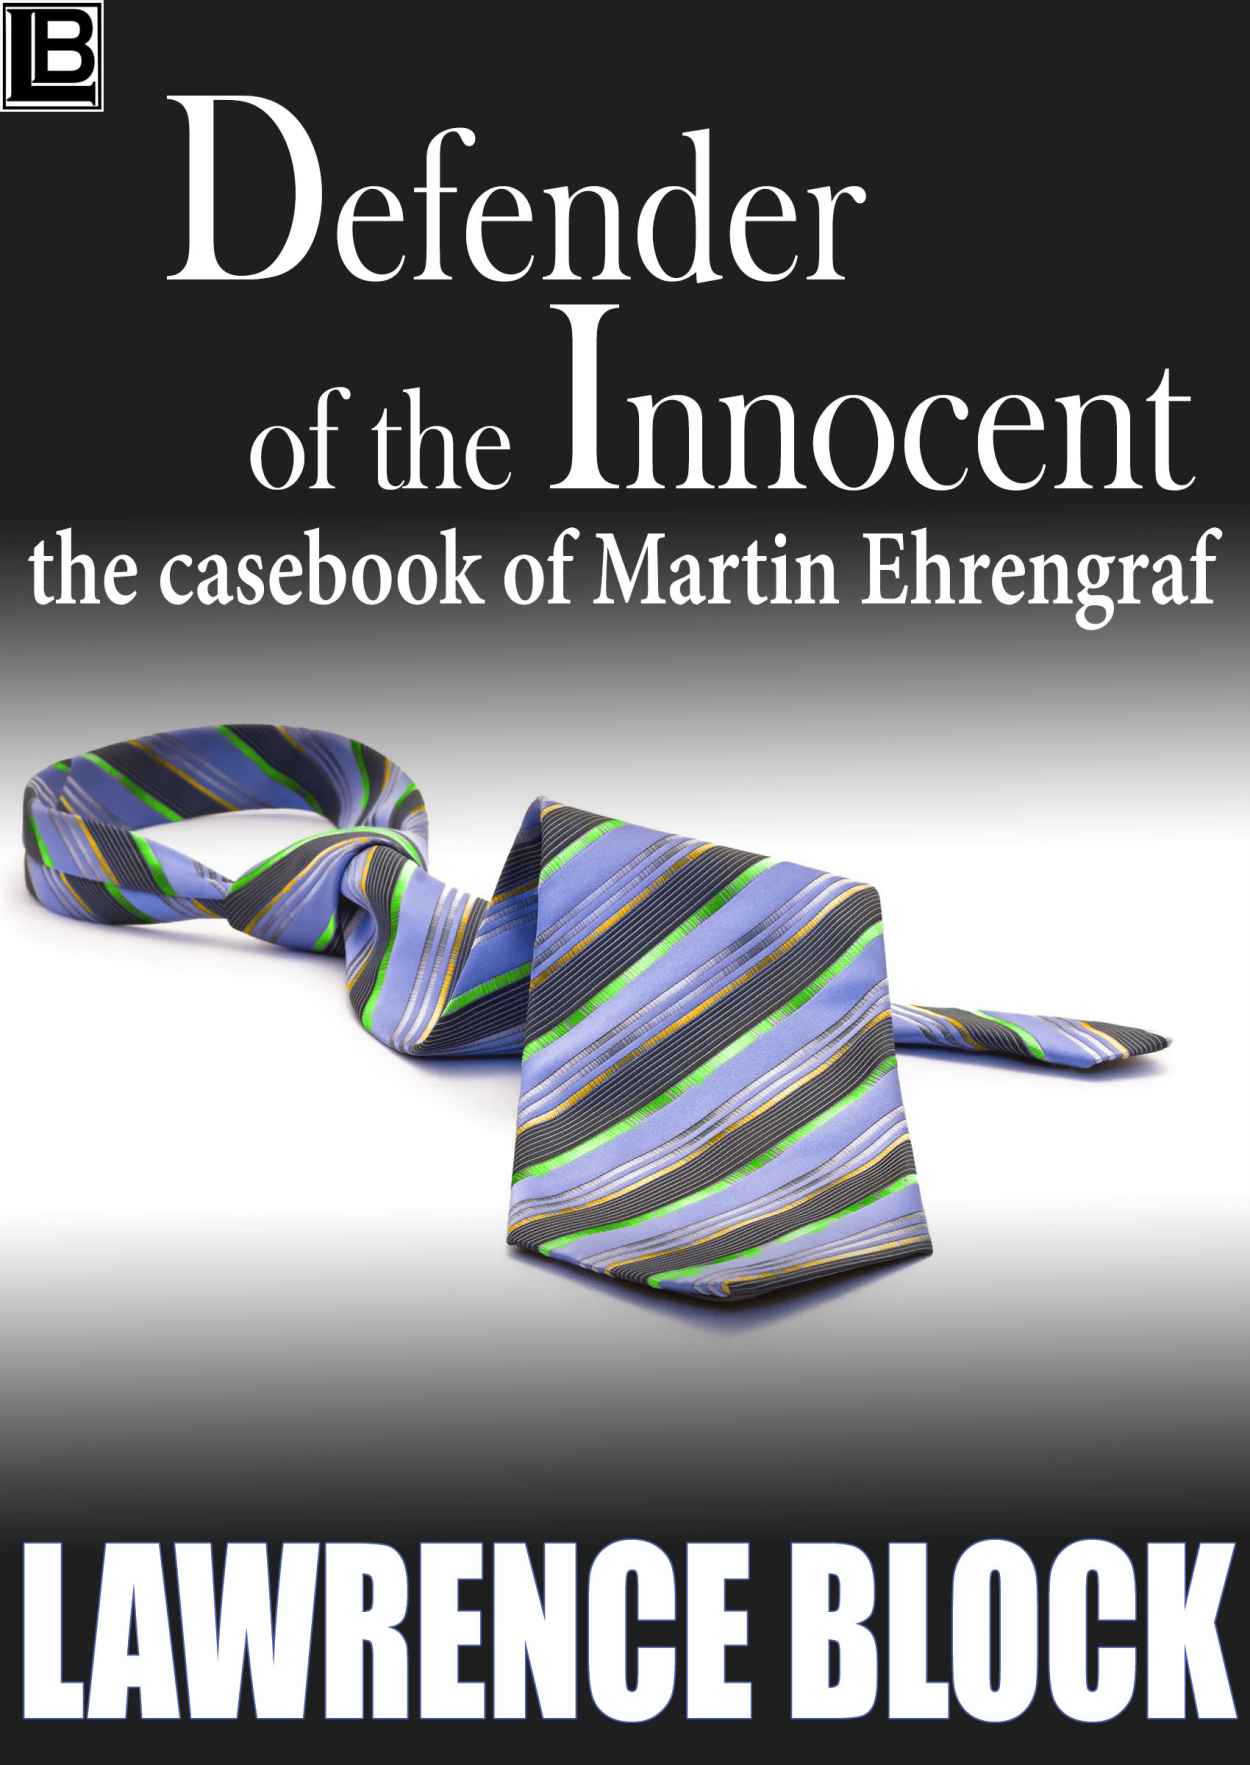 Defender of the Innocent: The Casebook of Martin Ehrengraf by Lawrence Block